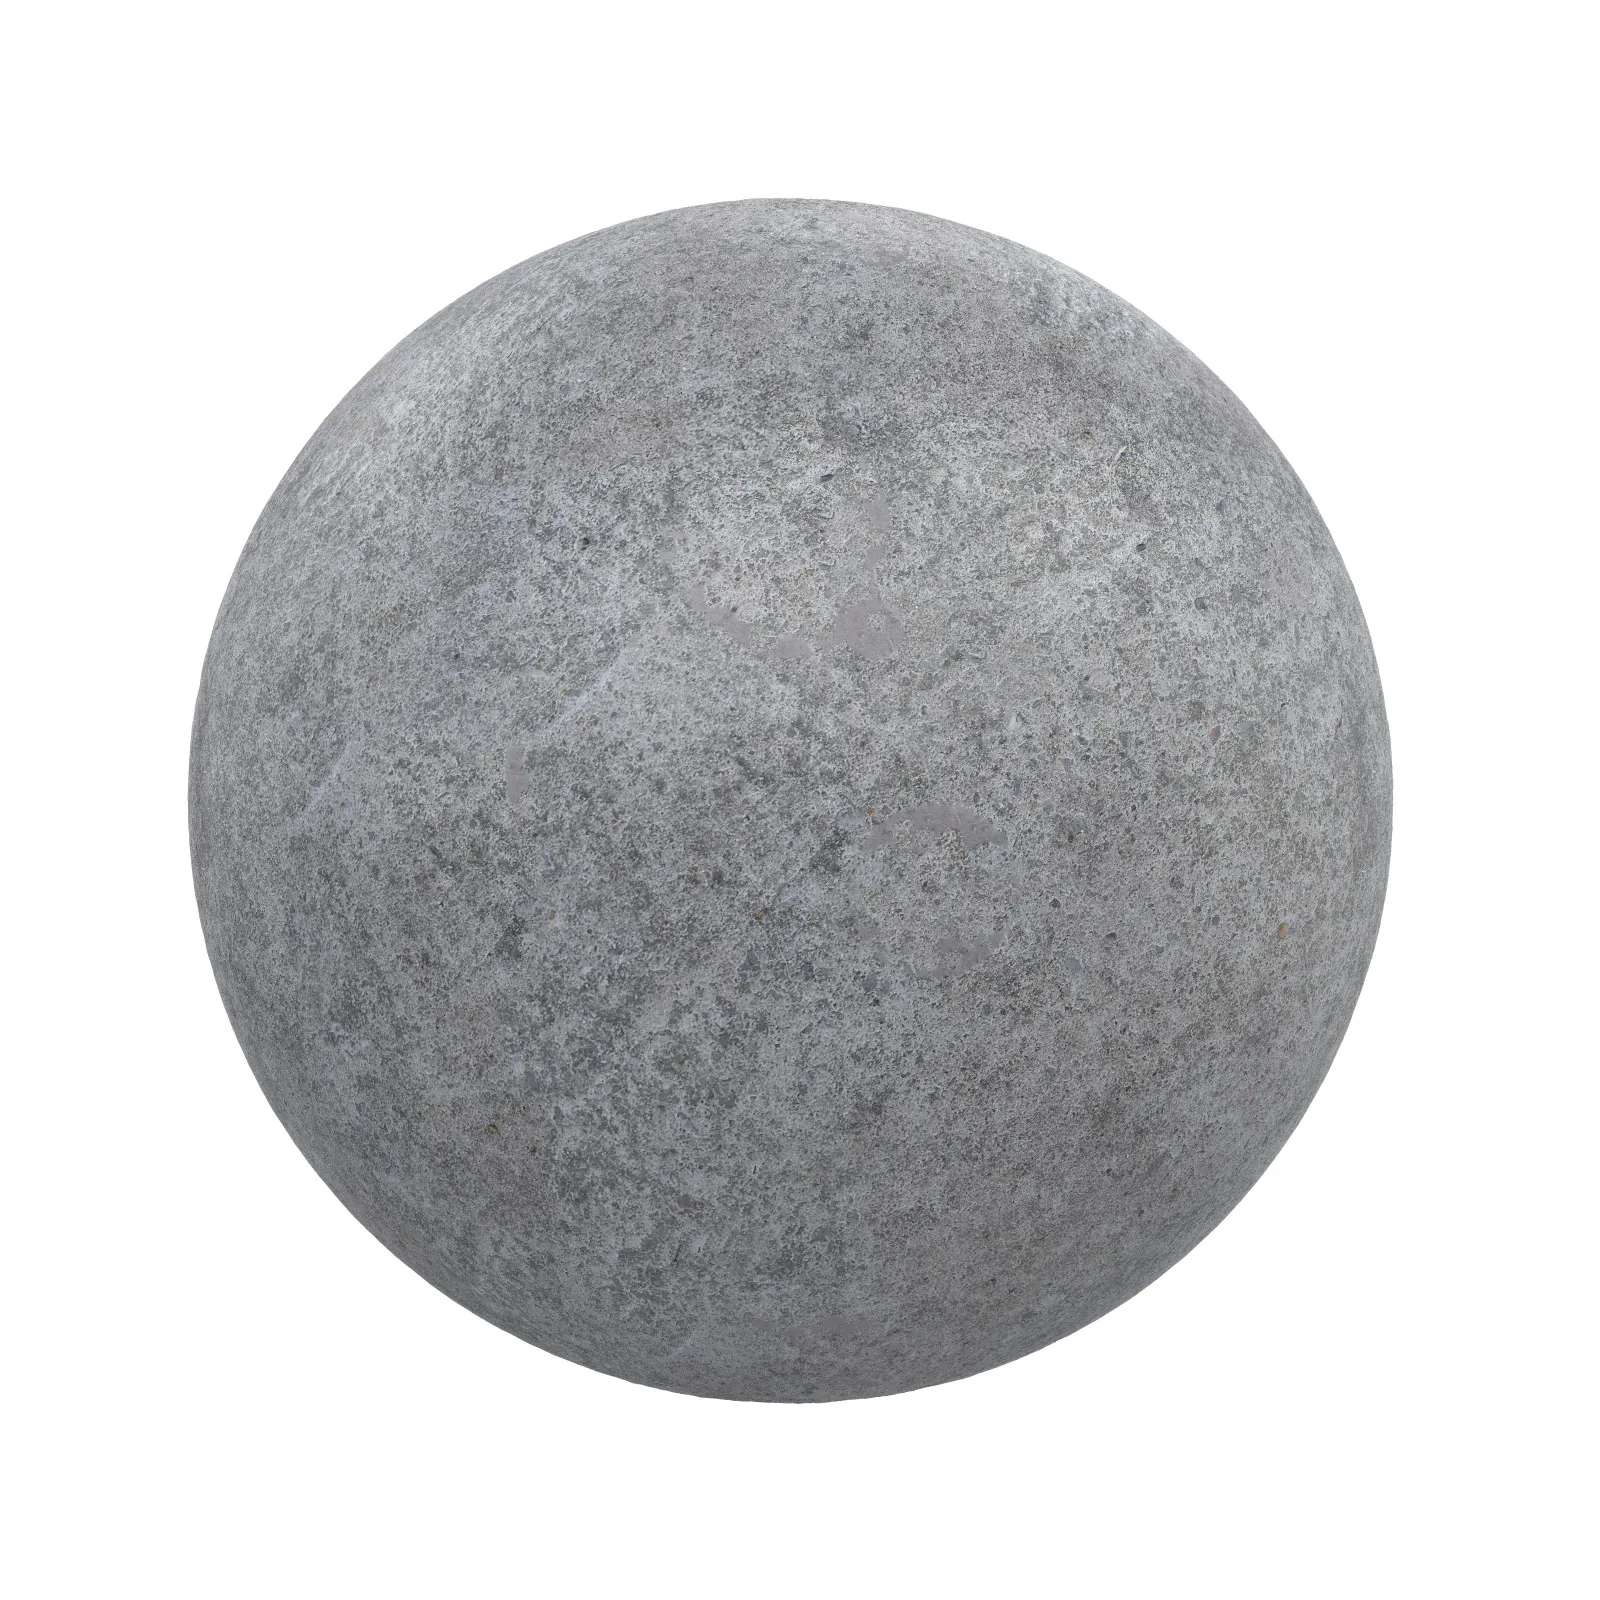 TEXTURES – STONES – CGAxis PBR Colection Vol 1 Stones – grey stone 6